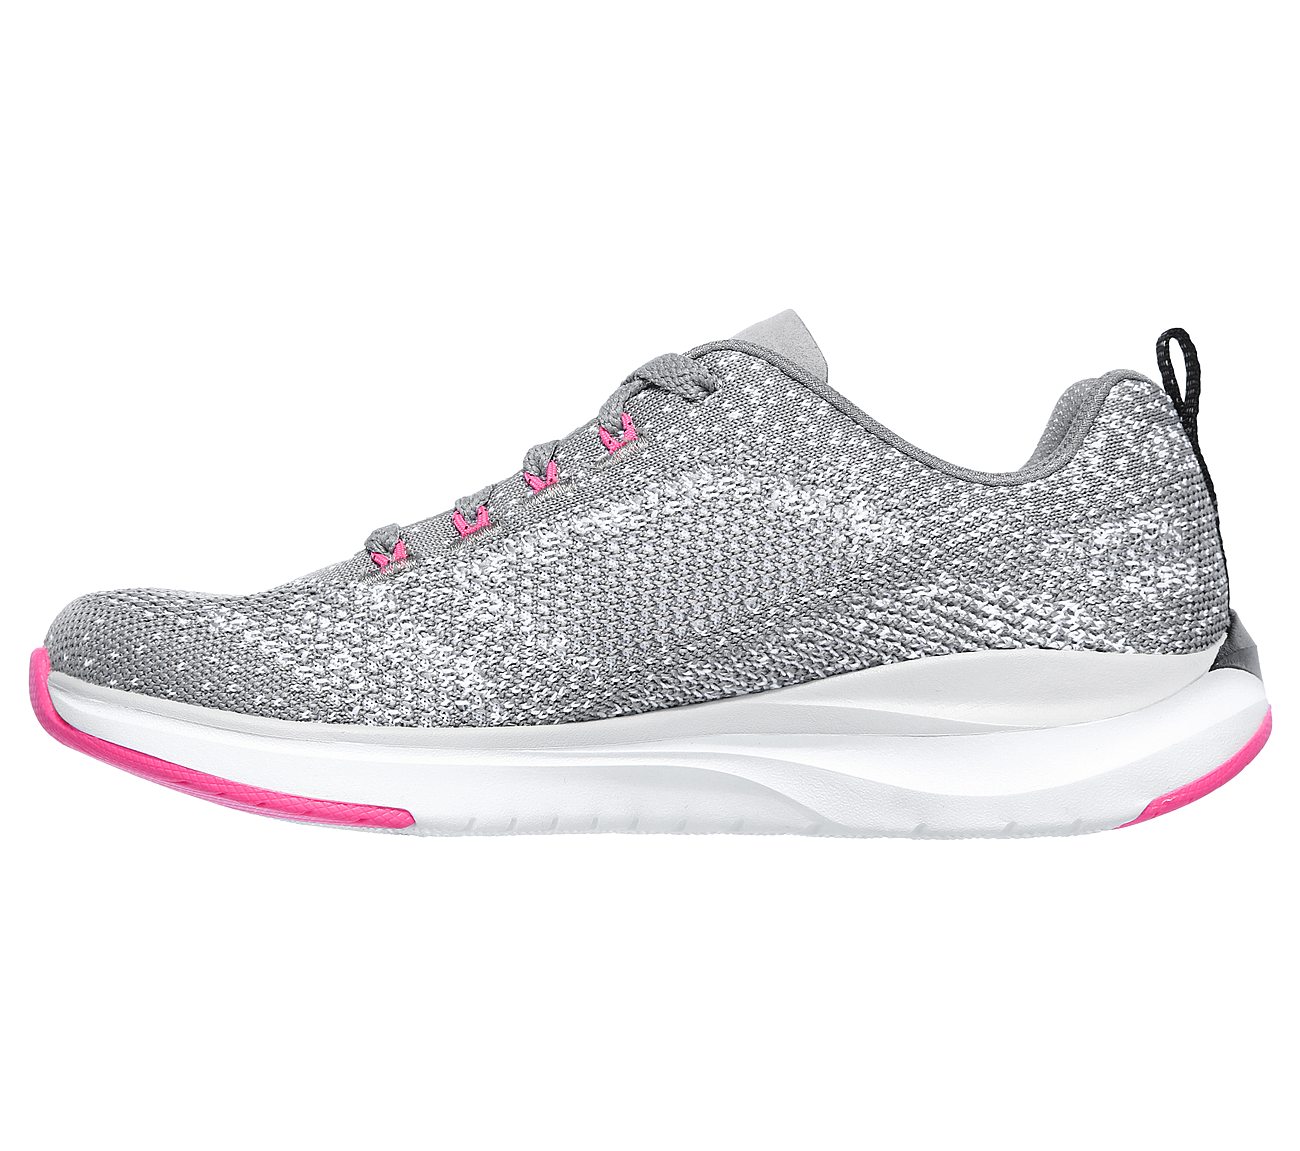 ULTRA GROOVE, GREY/HOT PINK Footwear Left View